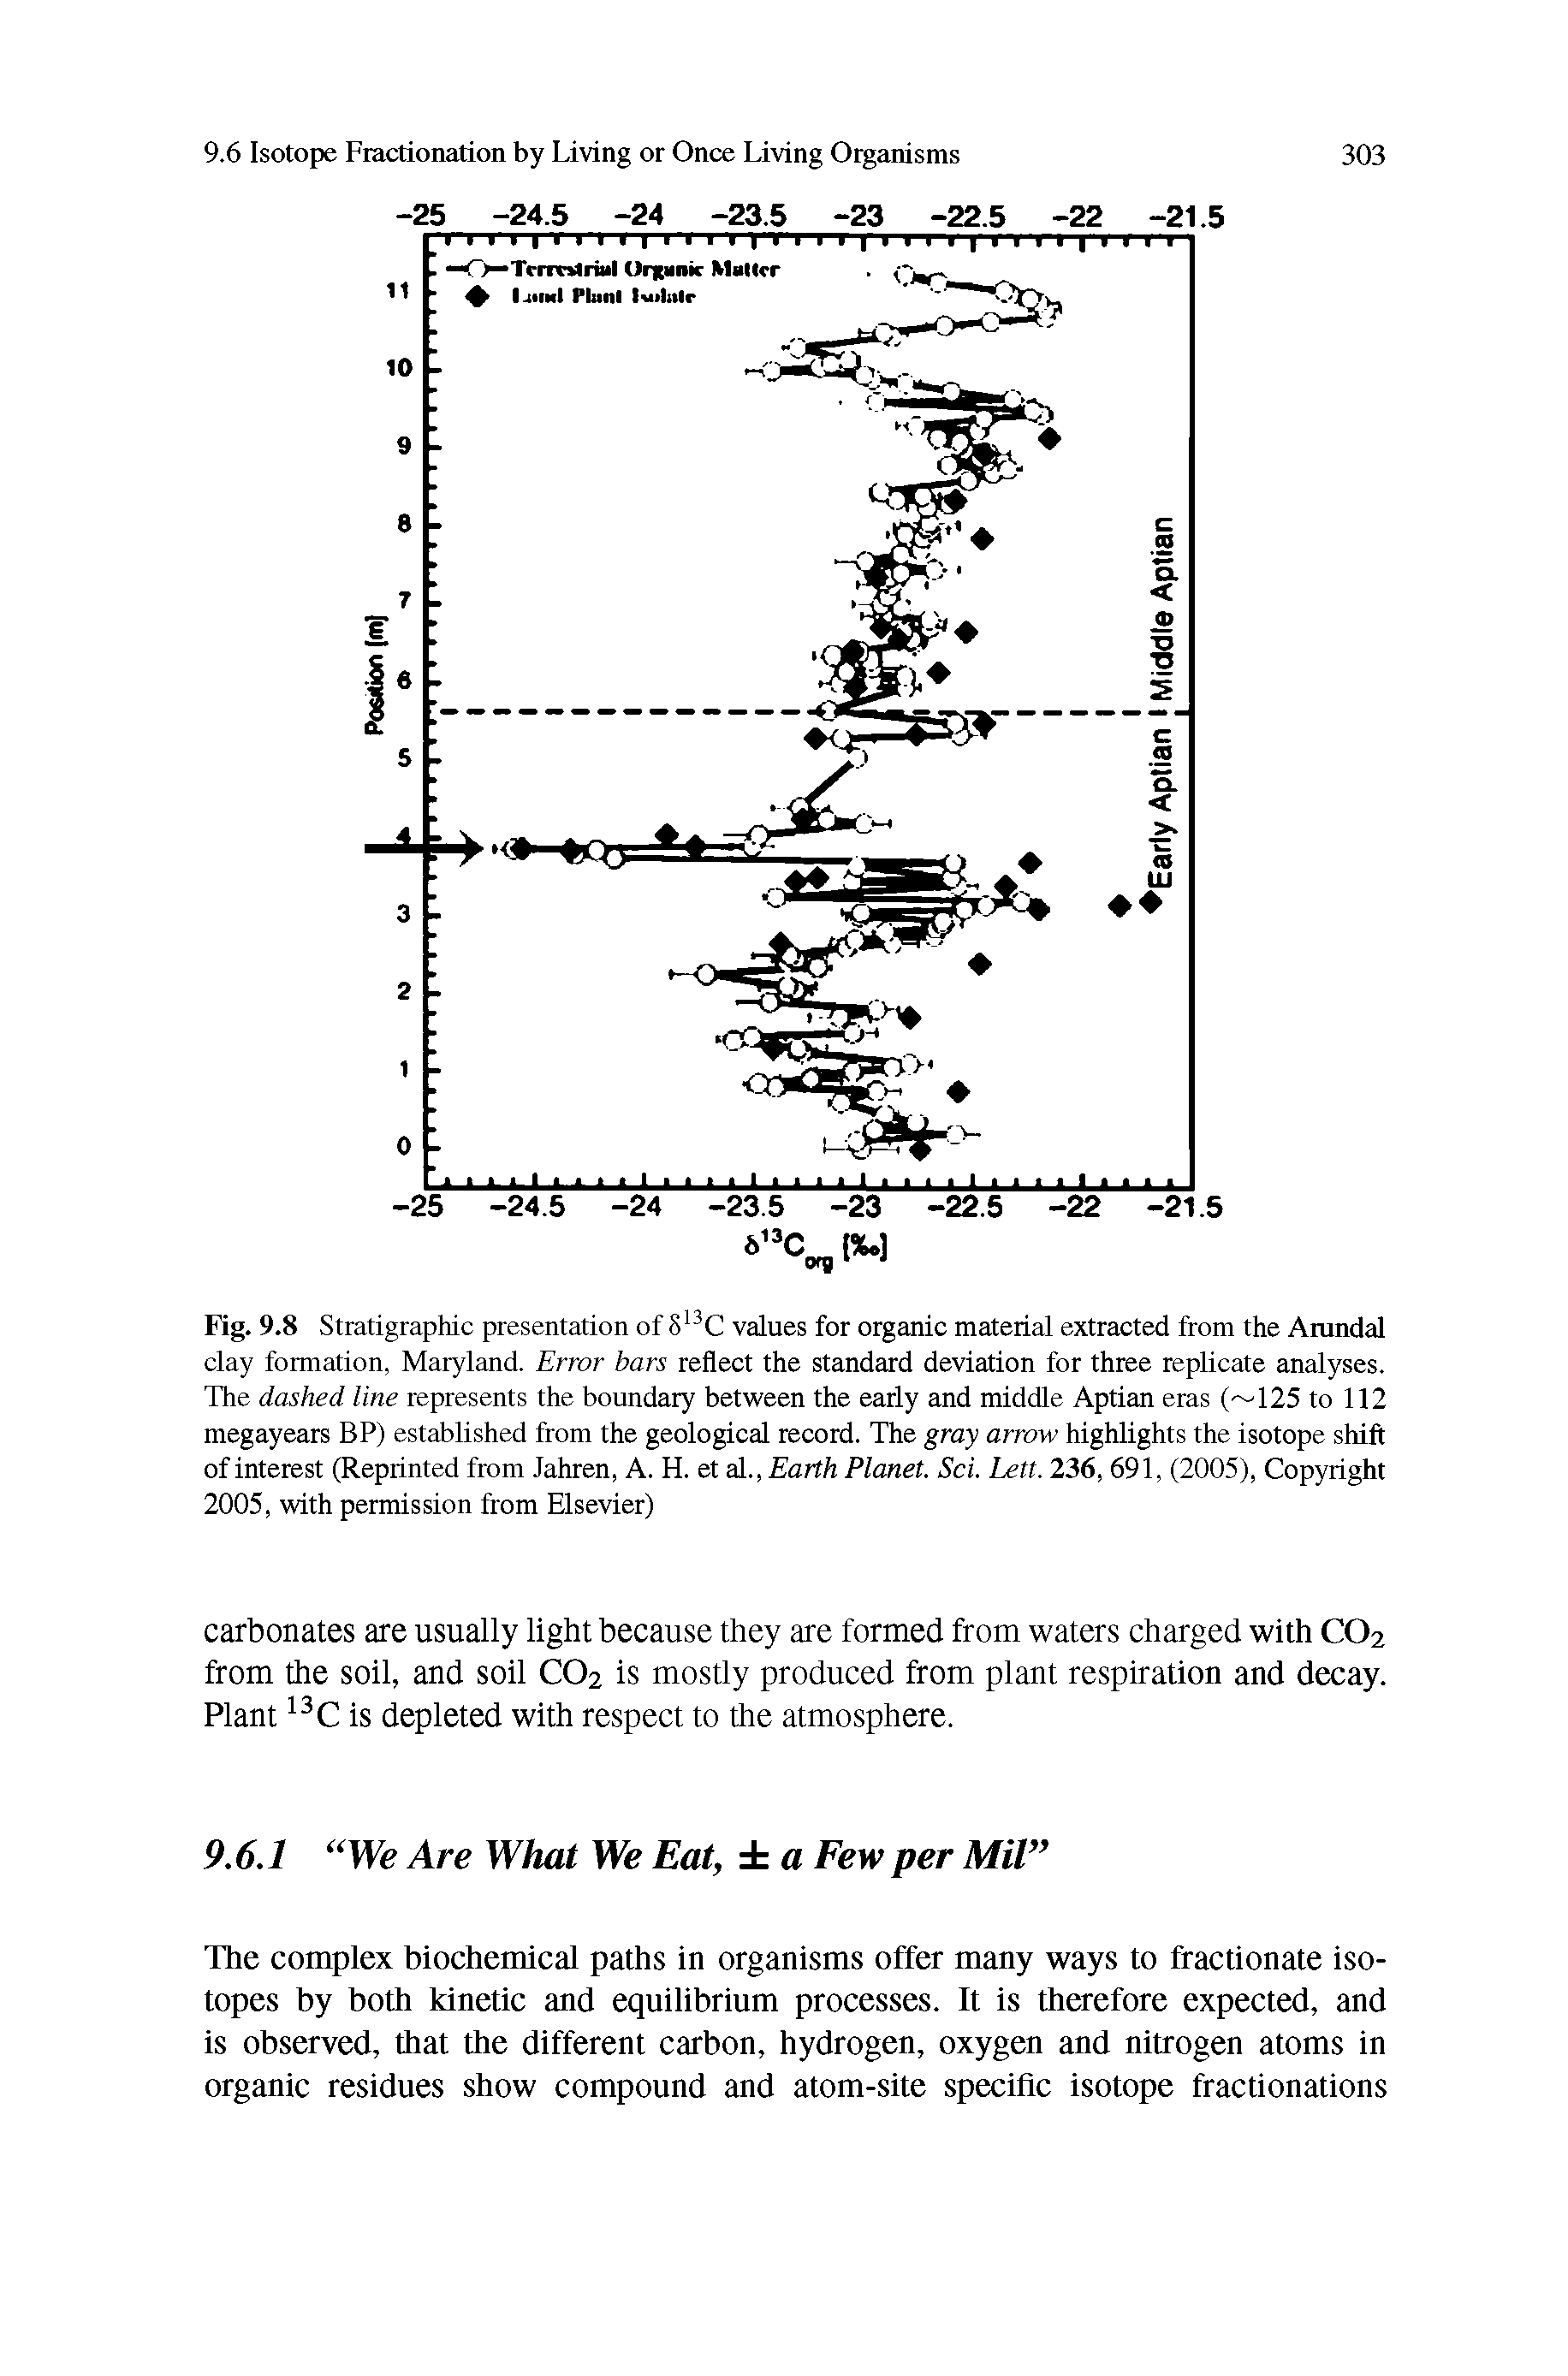 Fig. 9.8 Stratigraphic presentation of 813C values for organic material extracted from the Arundal clay formation, Maryland. Error bars reflect the standard deviation for three replicate analyses. The dashed line represents the boundary between the early and middle Aptian eras ( 125 to 112 megayears BP) established from the geological record. The gray arrow highlights the isotope shift of interest (Reprinted from Jahren, A. H. et al., Earth Planet. Sci. Lett. 236, 691, (2005), Copyright 2005, with permission from Elsevier)...